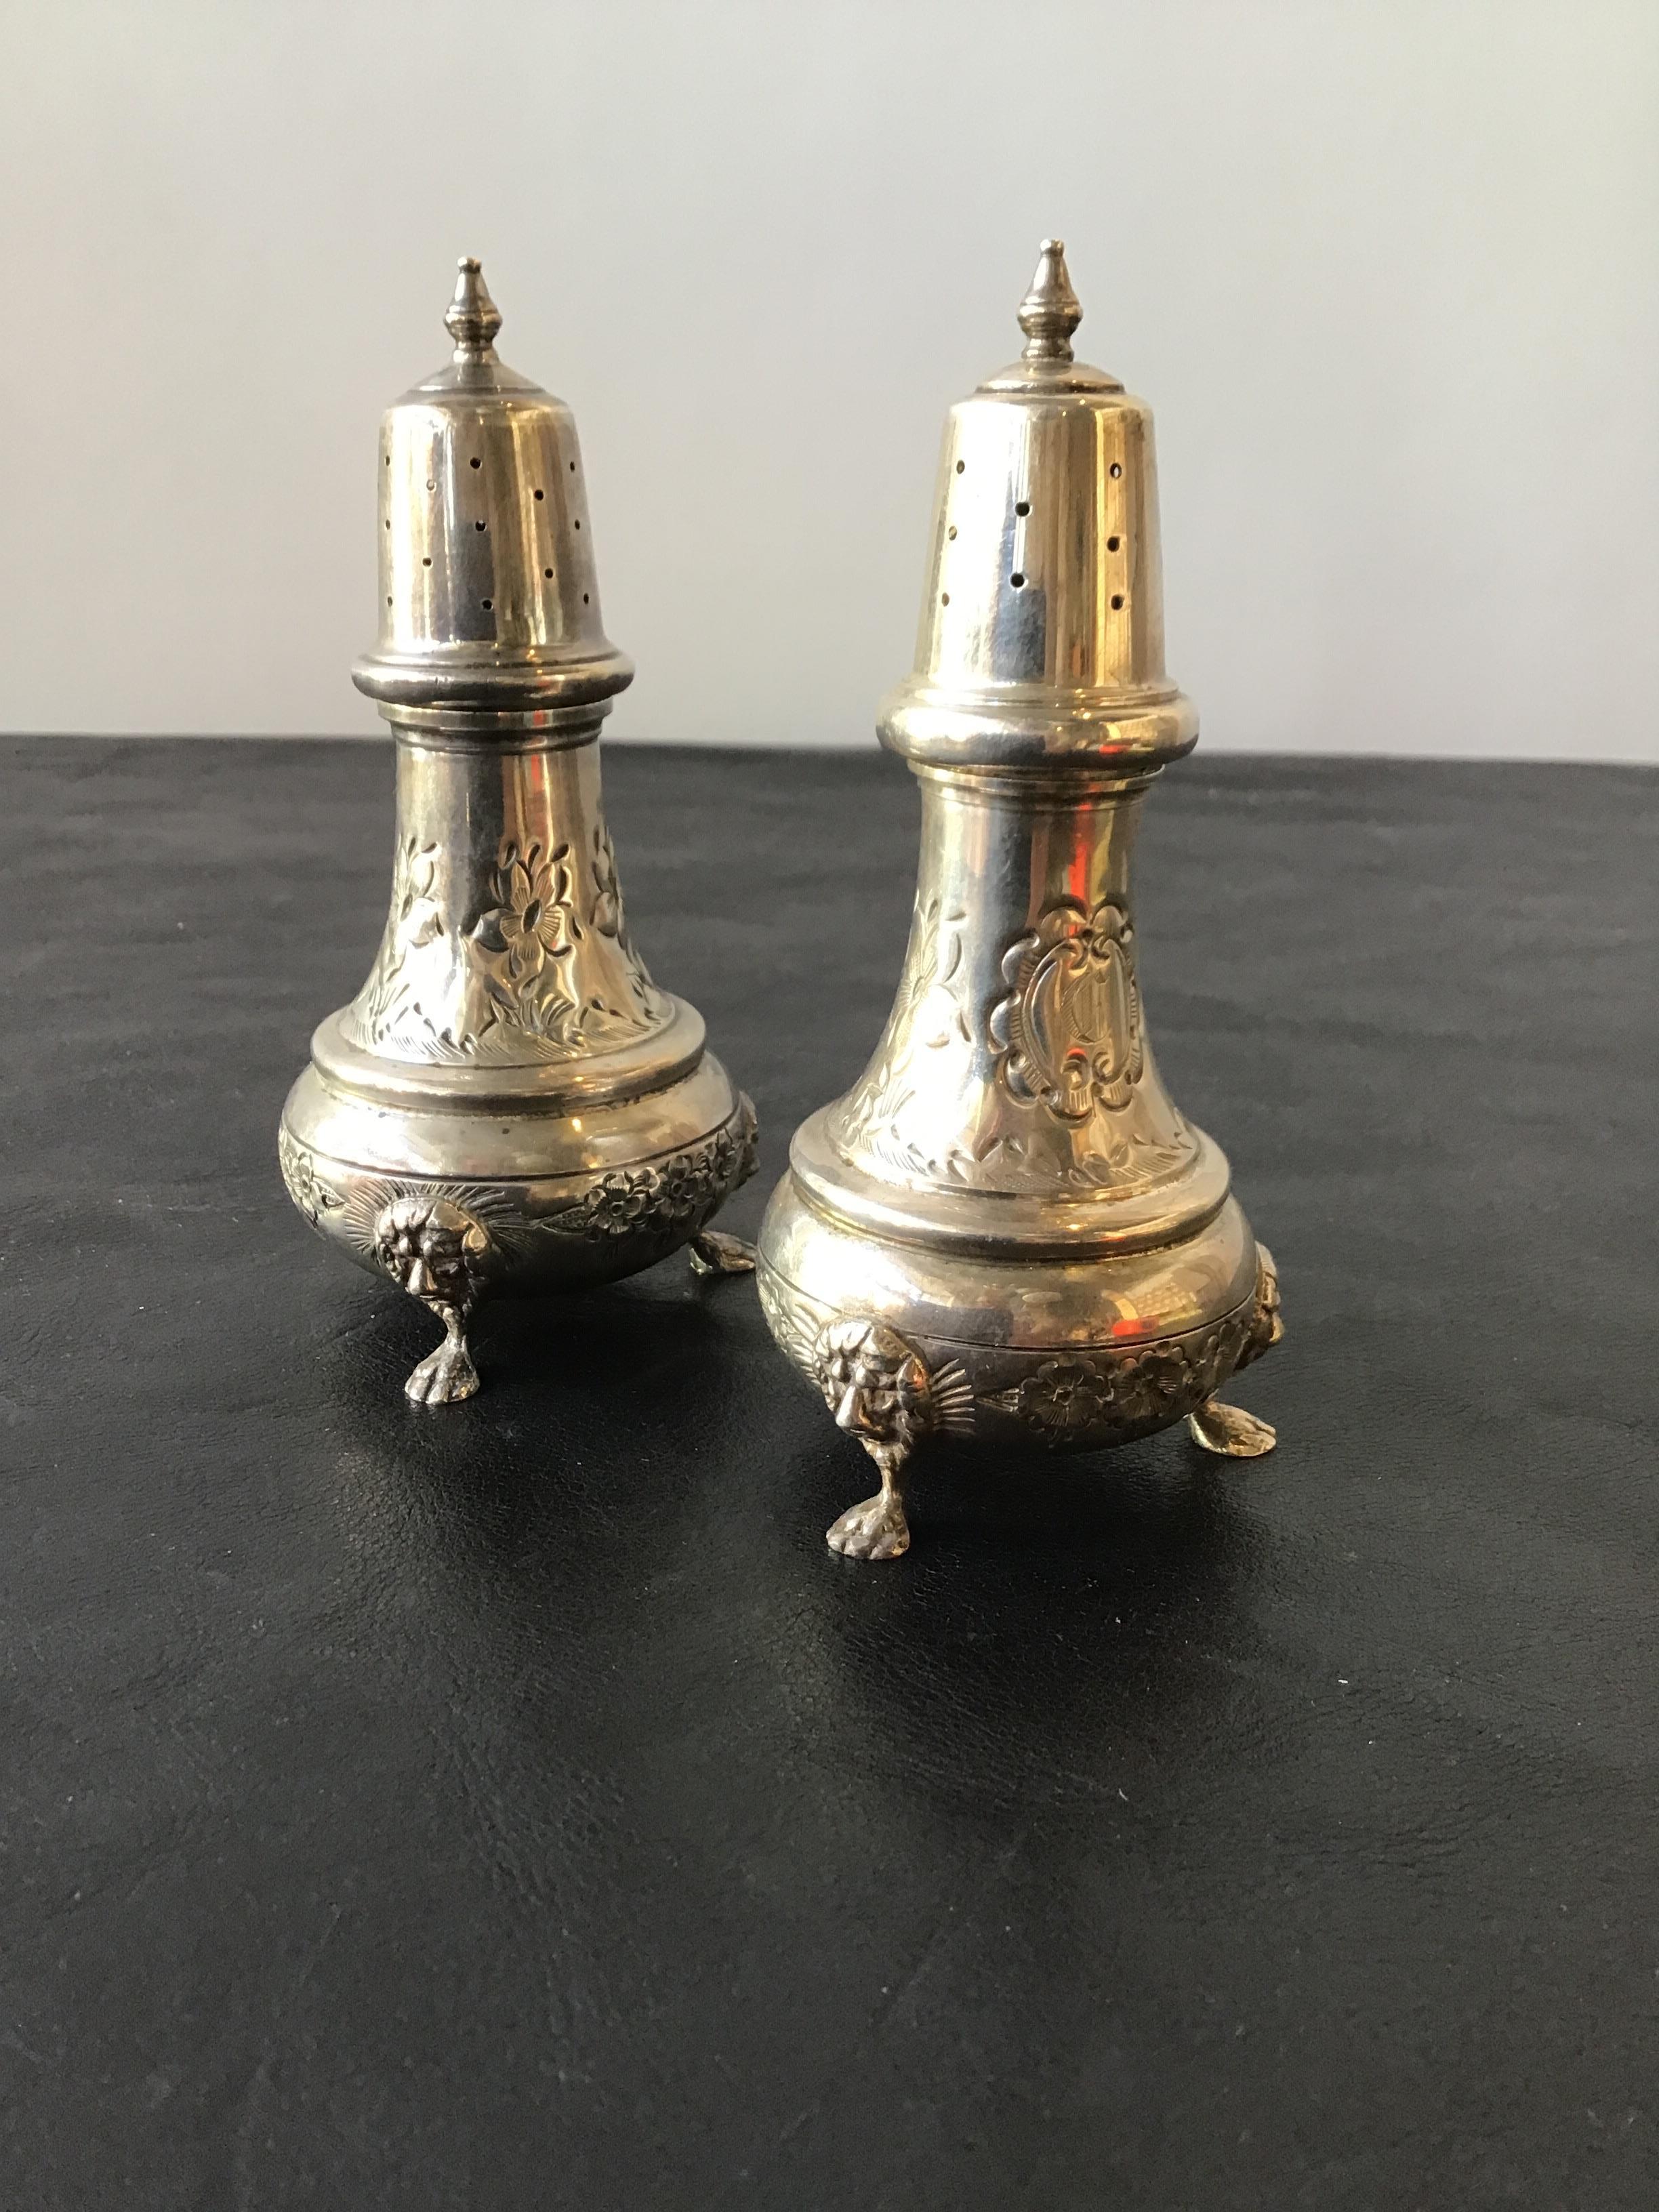 Pair of turn of the century, English solid sterling hand chase salt and pepper shakers with lion foot. Weighs 5.5 ounces. Initials inscribed on shakers.